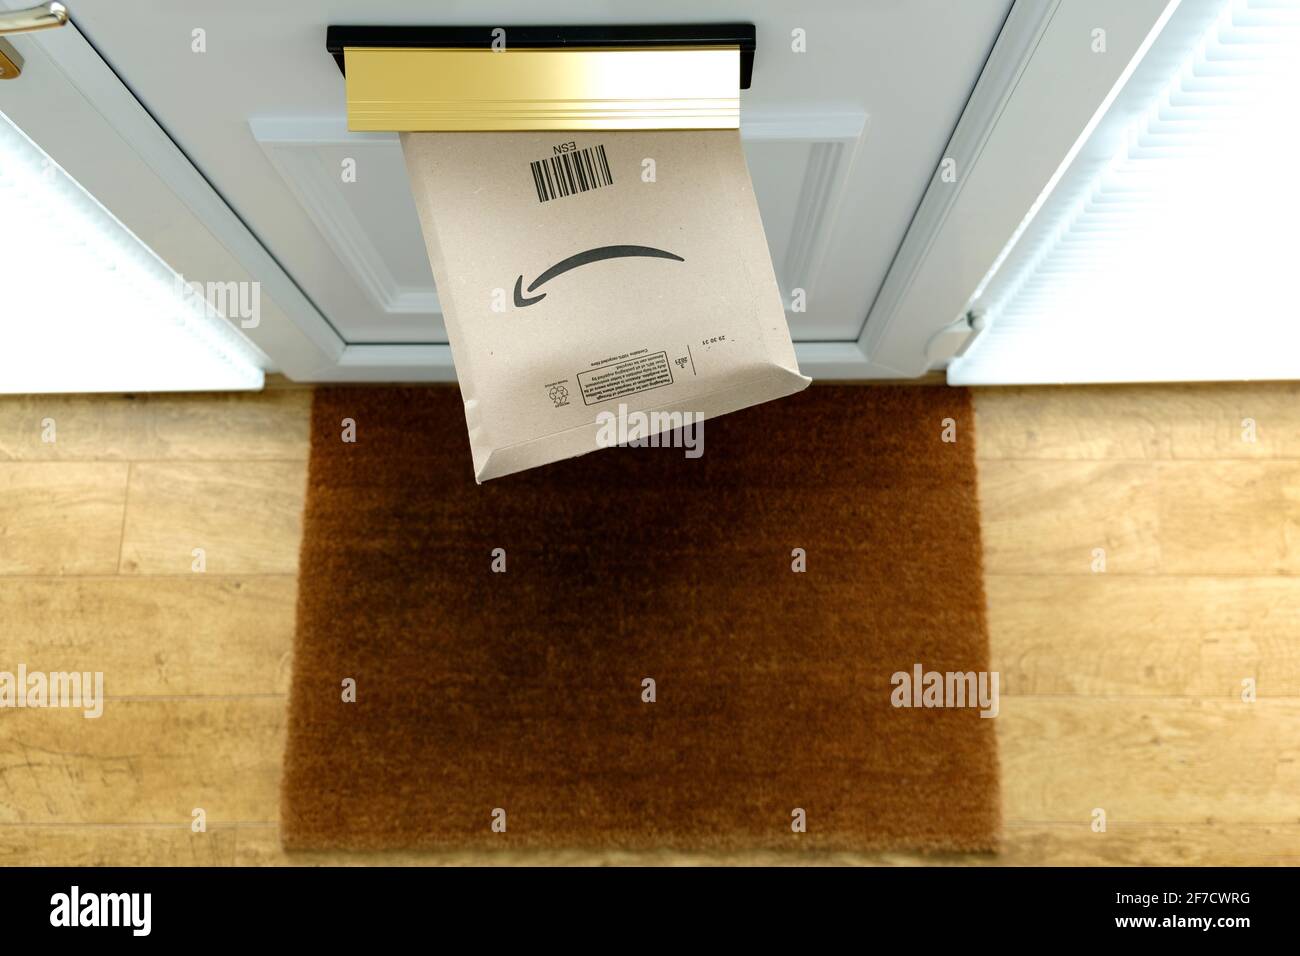 An Amazon Prime parcel delivery pushed through a house letter box in a house front door. The package is still in the letter box  and viewed from above Stock Photo